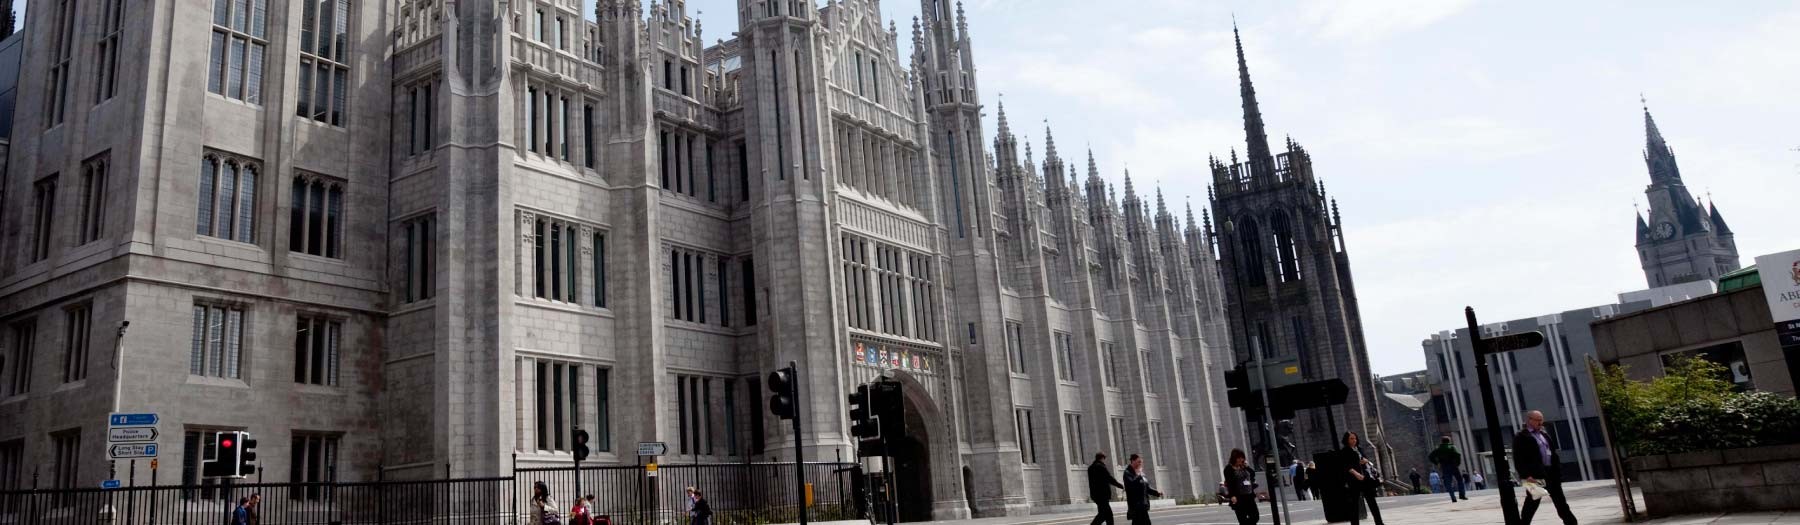 Image: Marischal College. Credit: Image used with permission from VisitScotland and Scottish Viewpoint.